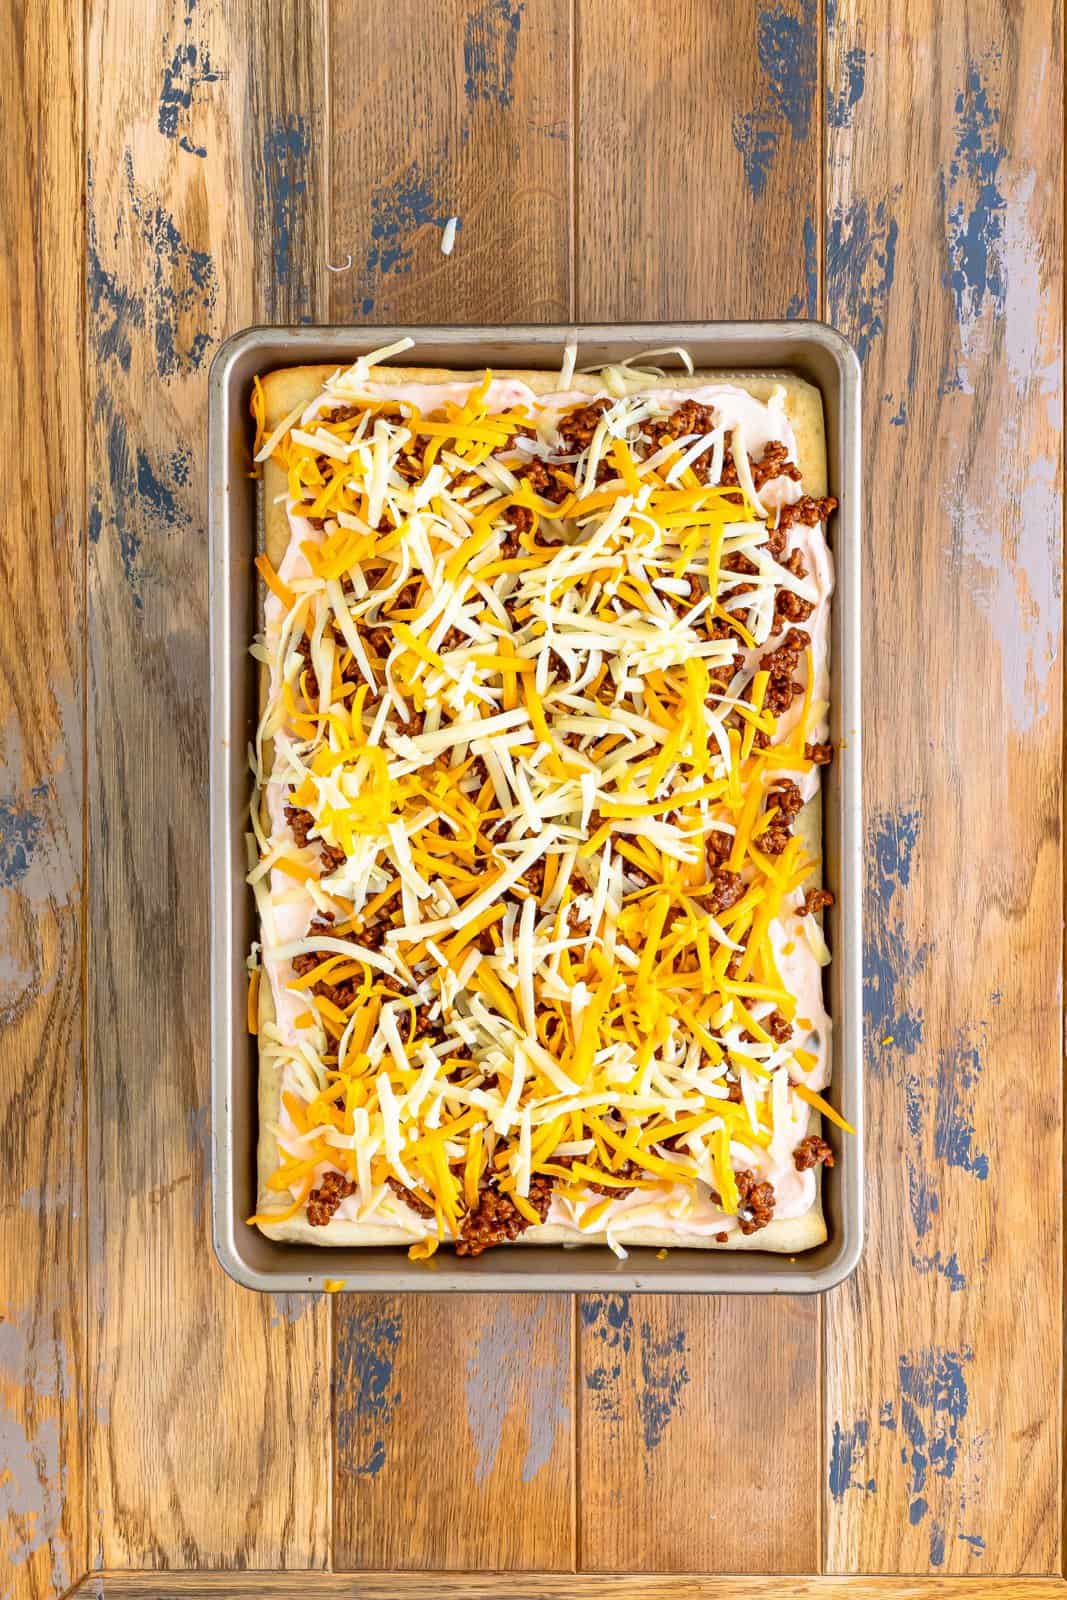 shredded cheddar and Monterey Jack cheeses evenly sprinkled on top of taco pizza.